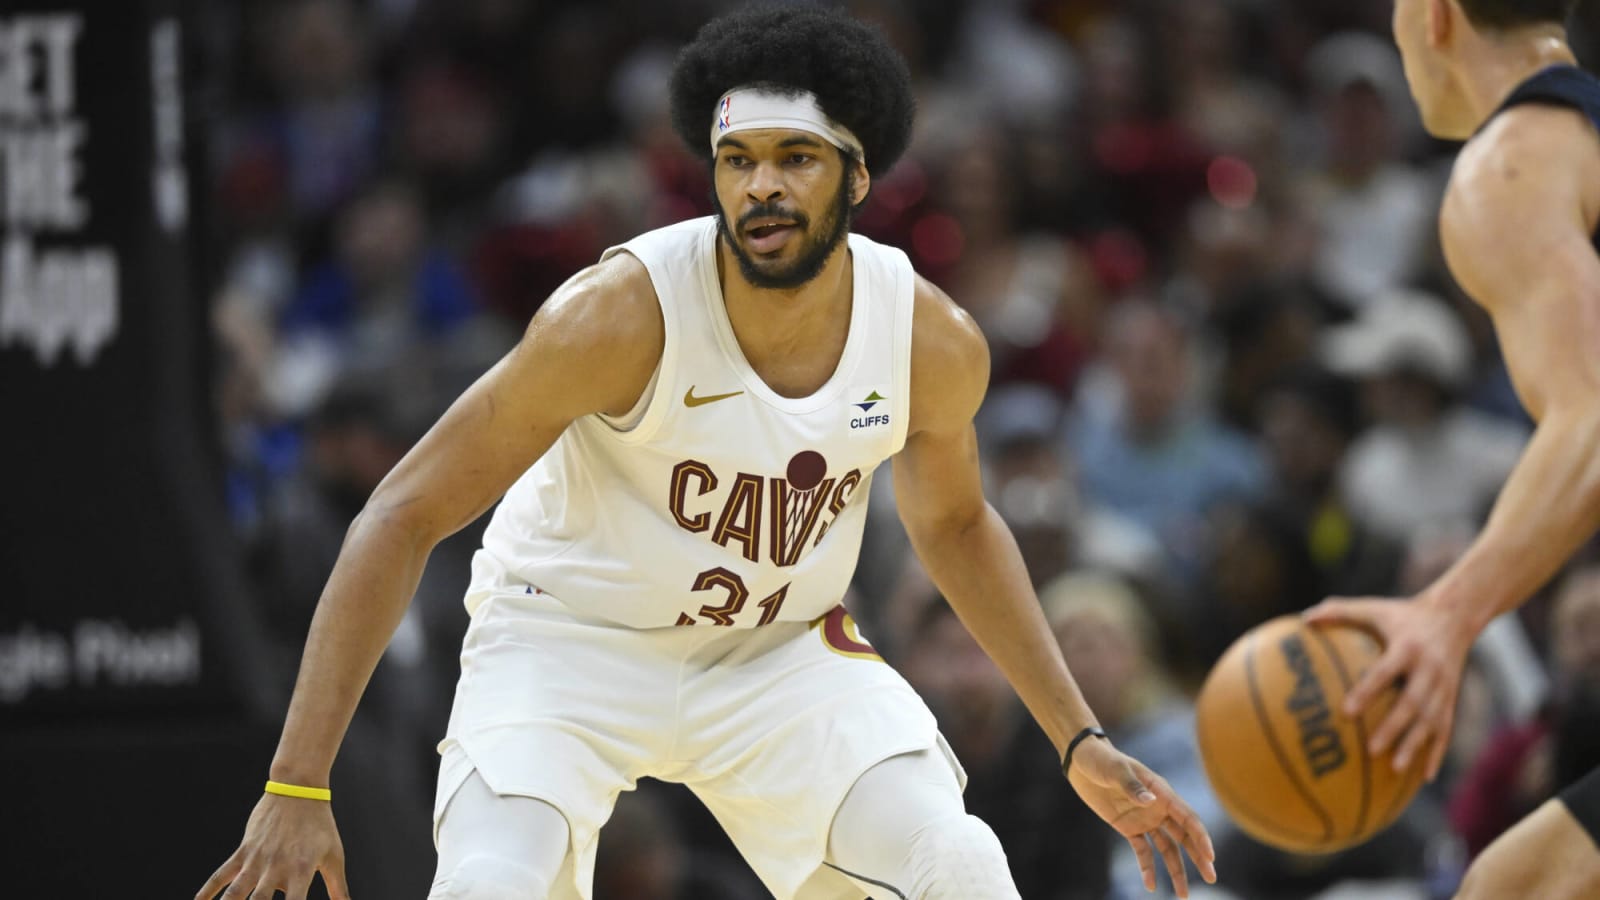 NBA Rumors: Cavs Starter Has Several Interested Trade Suitors